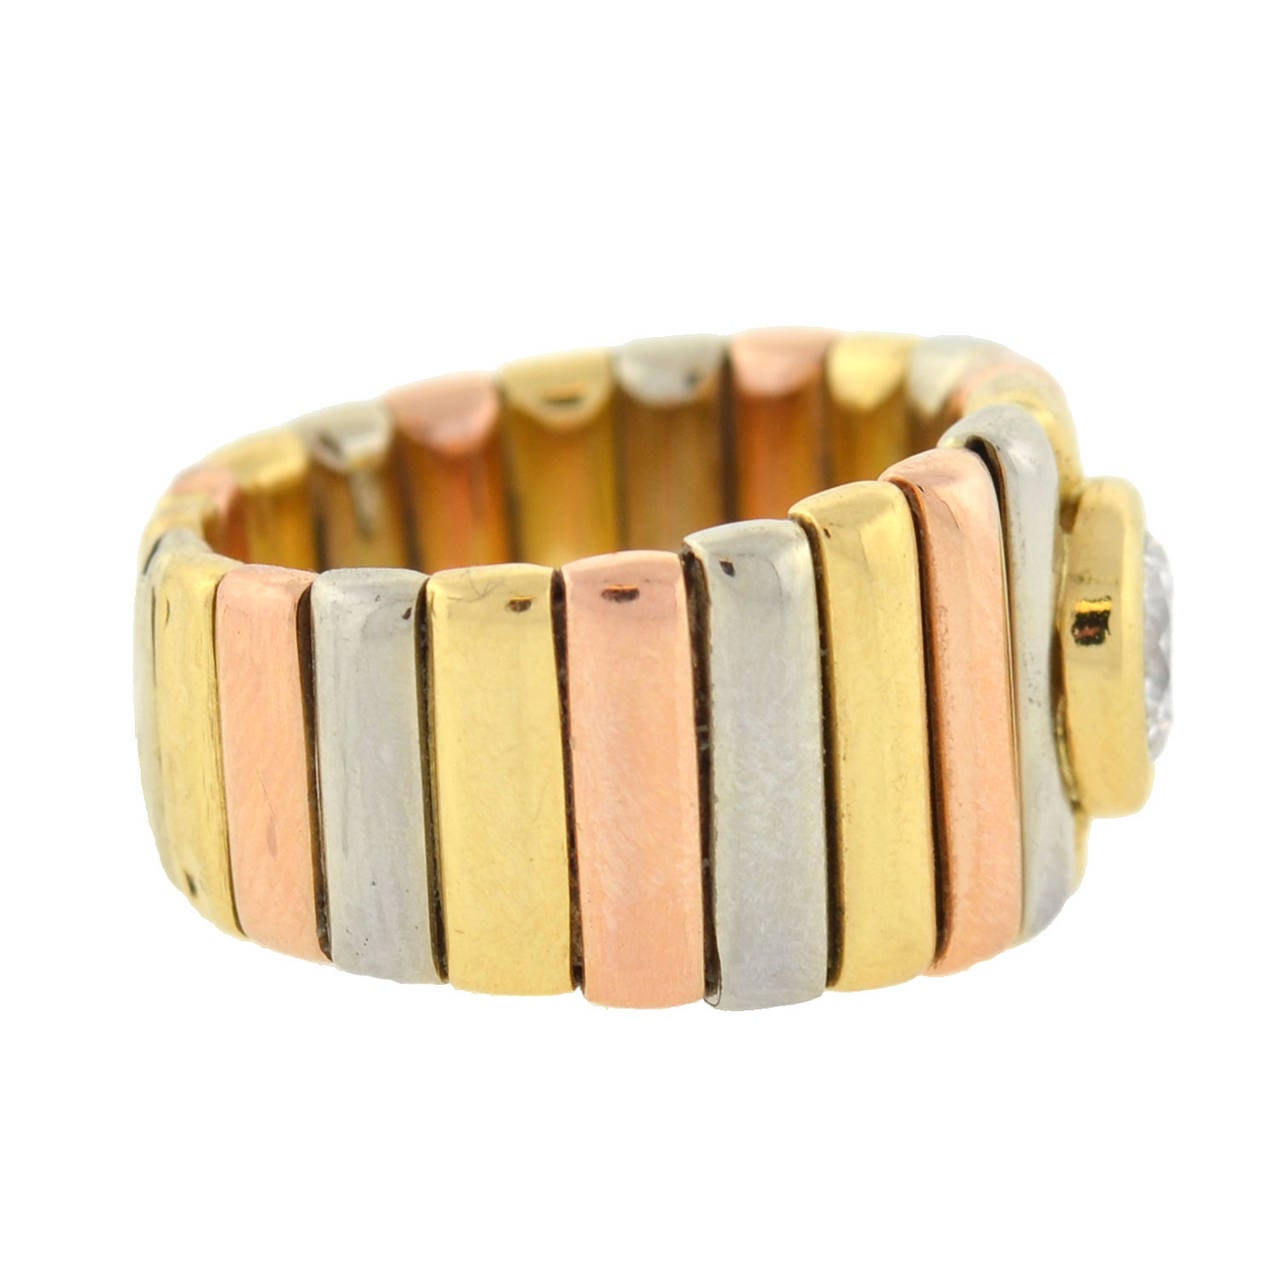 This fabulous Estate ring is a signed piece by Cartier! Made of vibrant 18kt yellow gold, the heavy, wide ring has a striking tri-color design and is substantial in size. A pattern of yellow, rose, and white gold bars form the band, giving the